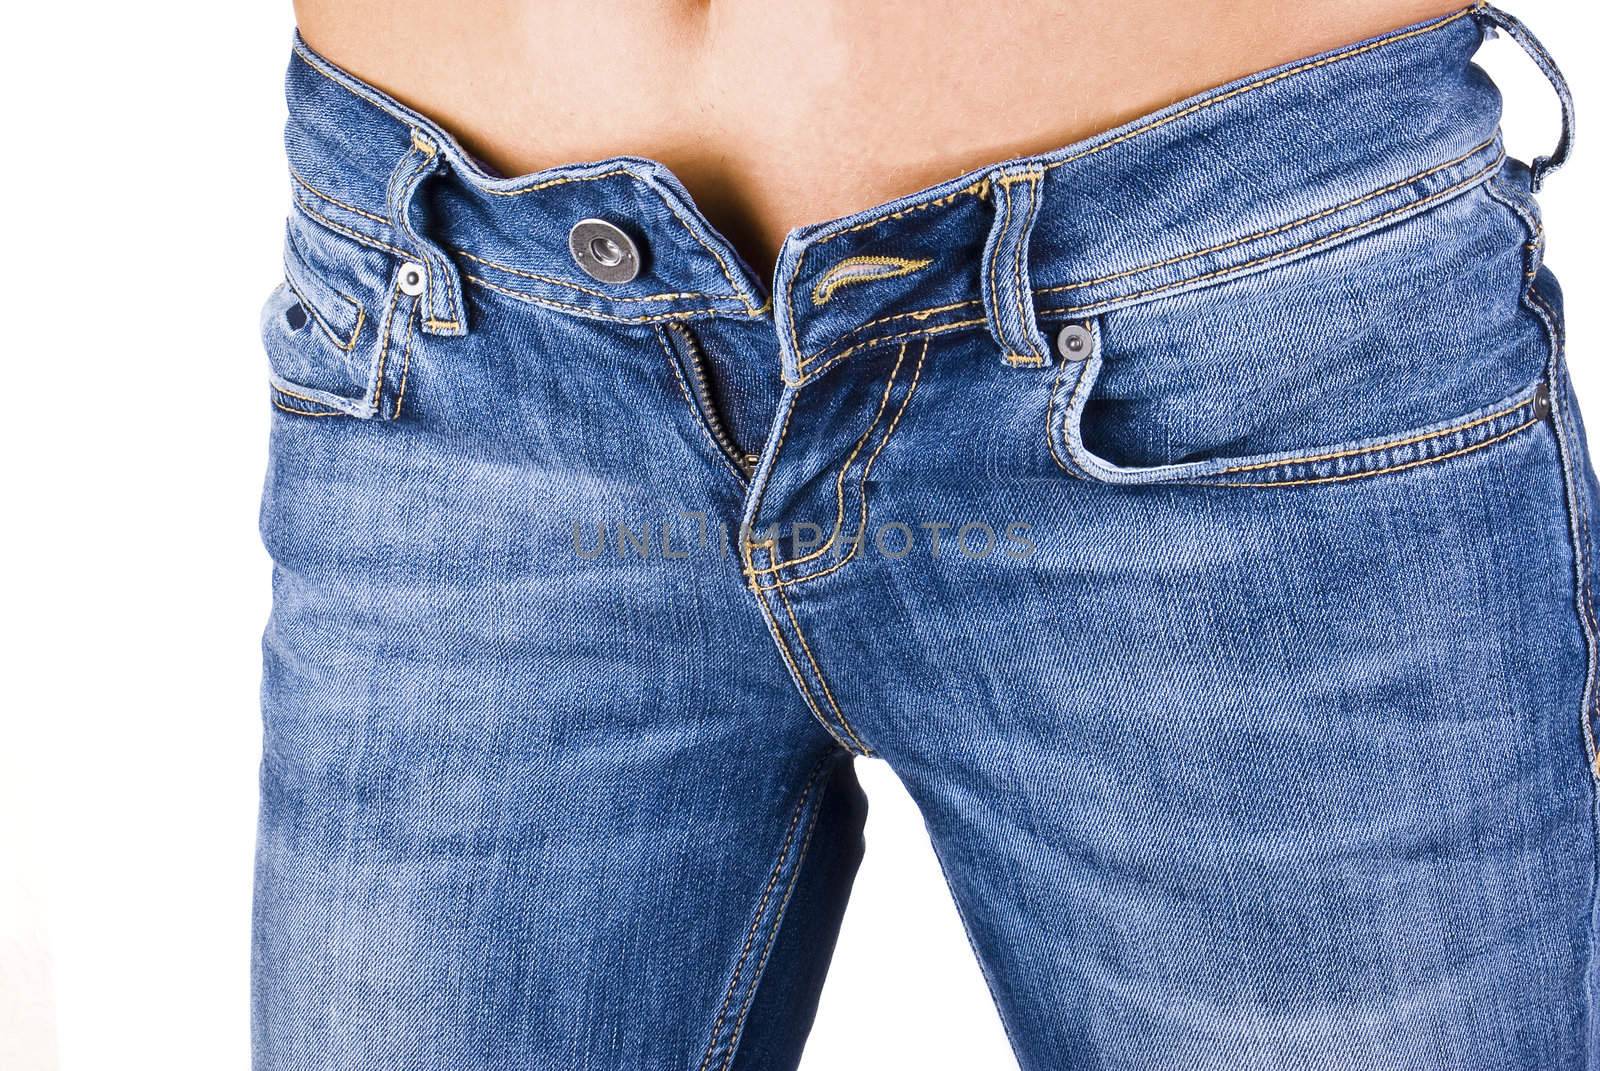 women wearing a pair of blue jeans against white background